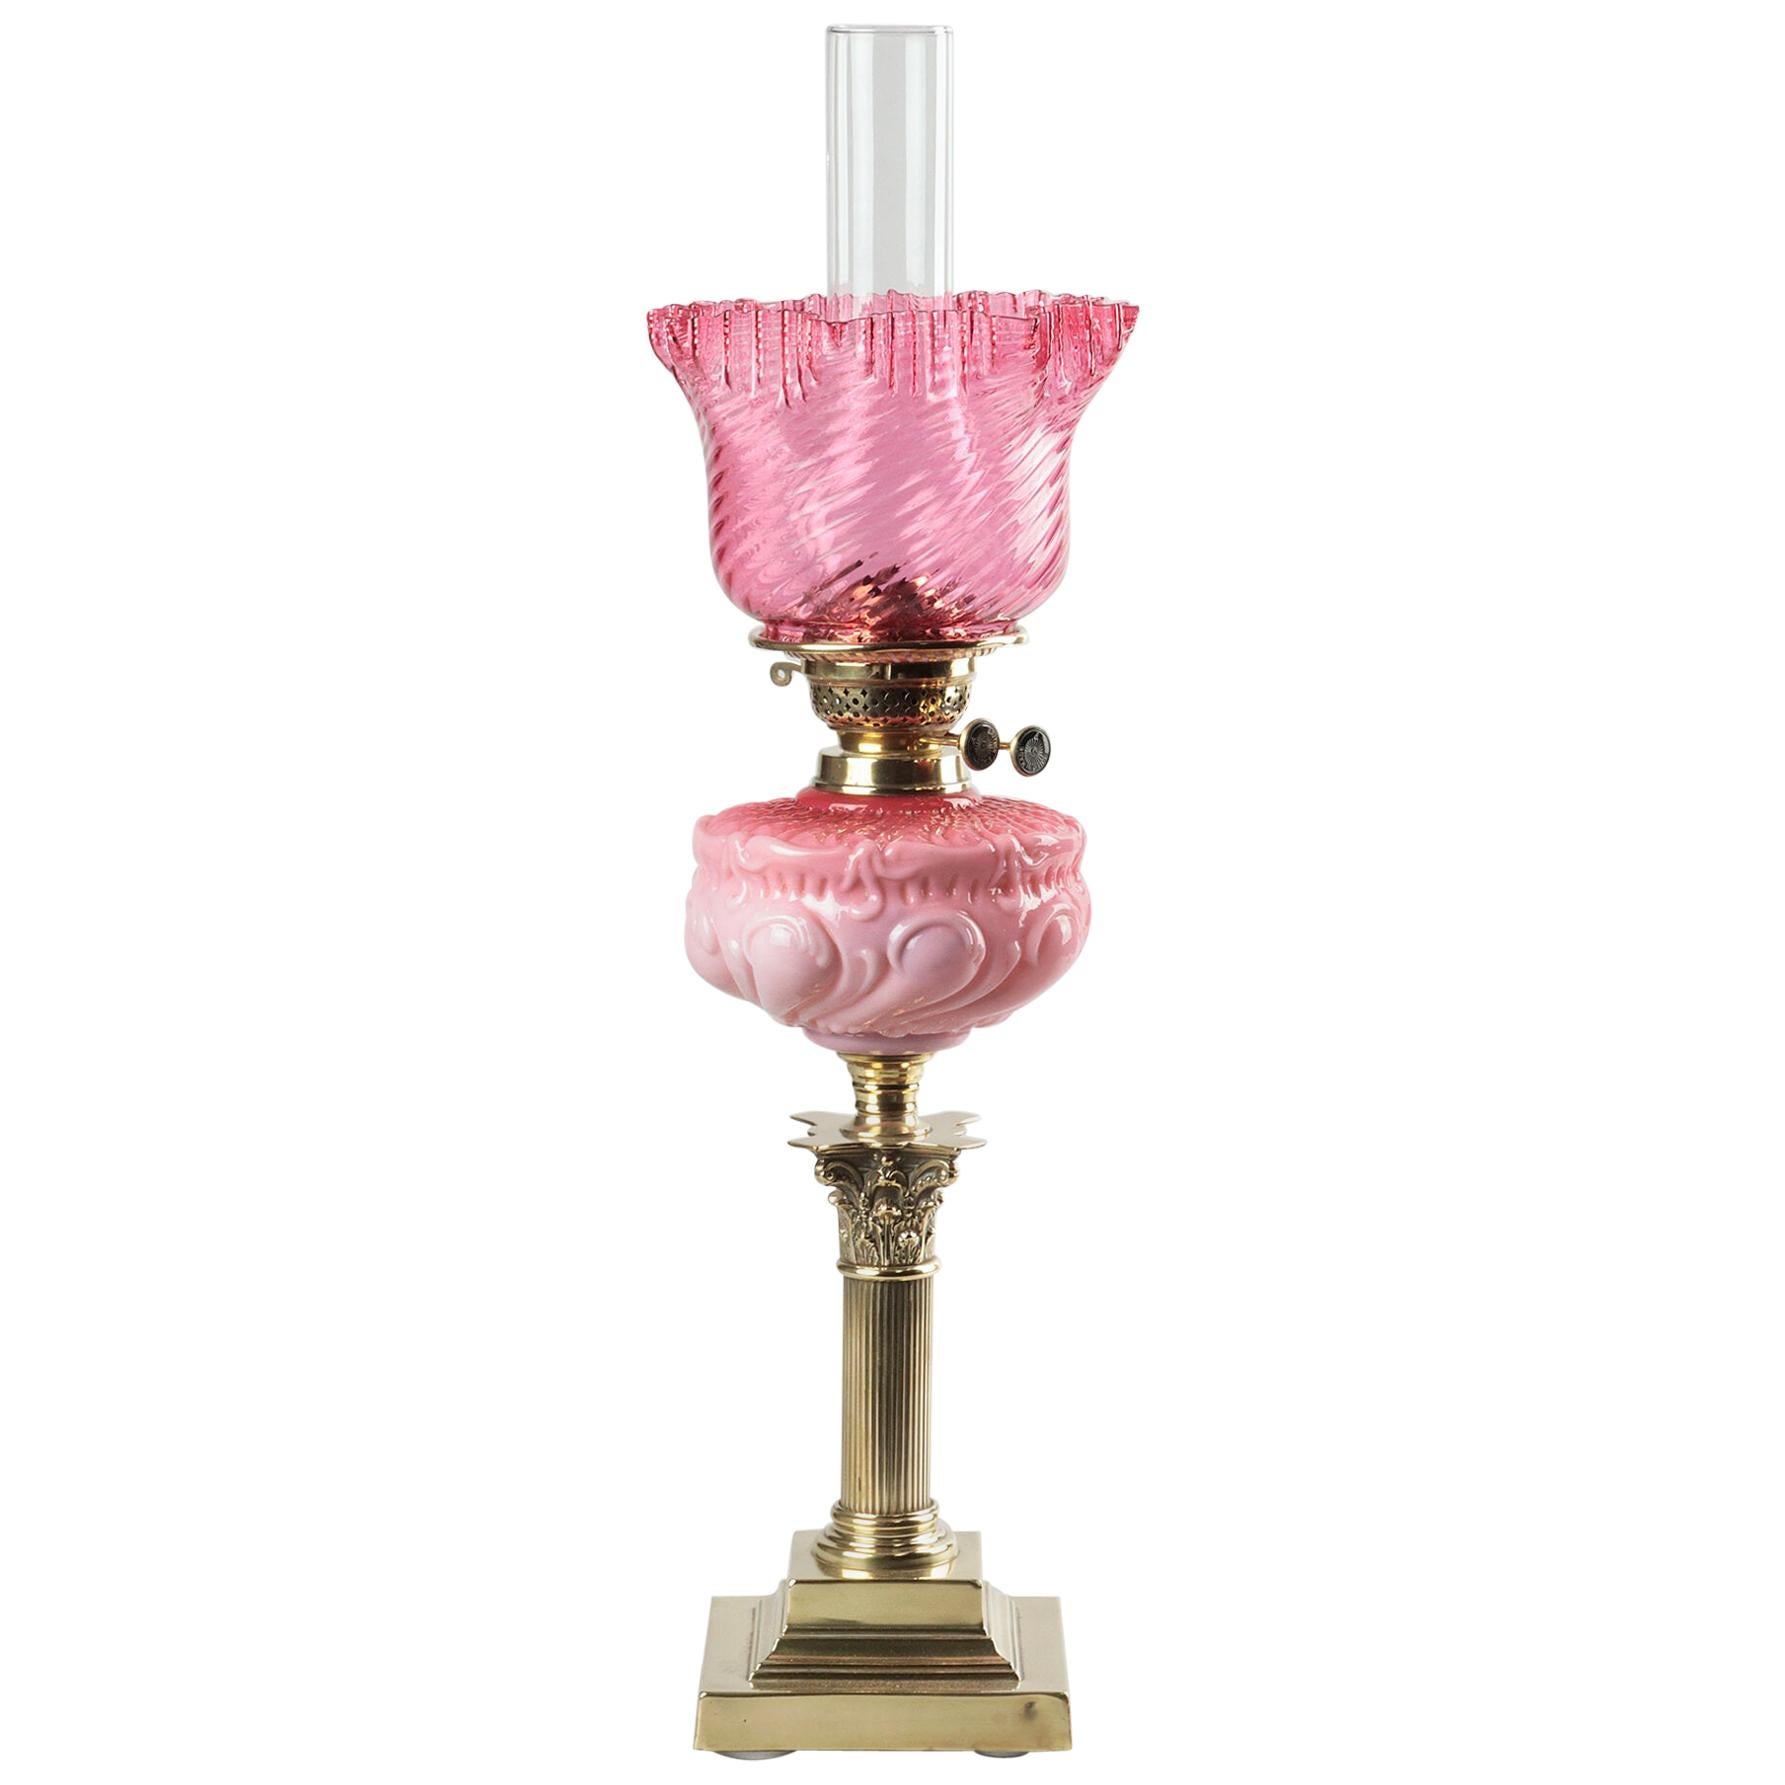 Victorian Oil lamp with Brass Foot and Pink Glass Shade